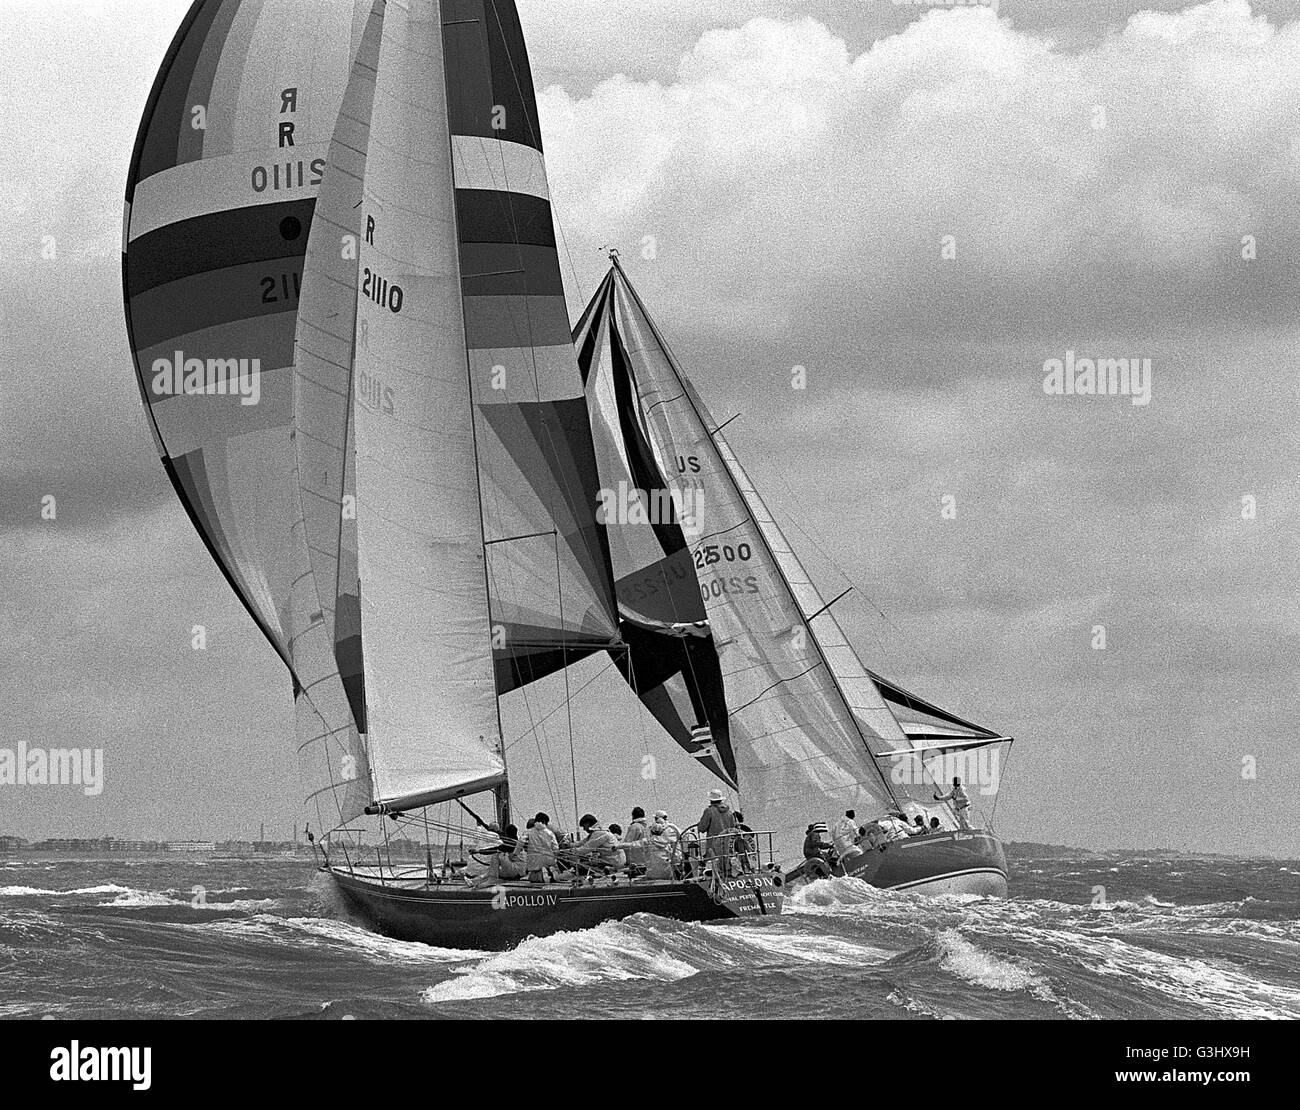 AJAXNETPHOTO. 1979. SOLENT, ENGLAND. - ADMIRAL'S CUP - SOLENT INSHORE RACE. APOLLO IV (SIN) AND WILLIWAW (USA). PHOTO:JONATHAN EASTLAND/AJAX REF:79 2008 Stock Photo